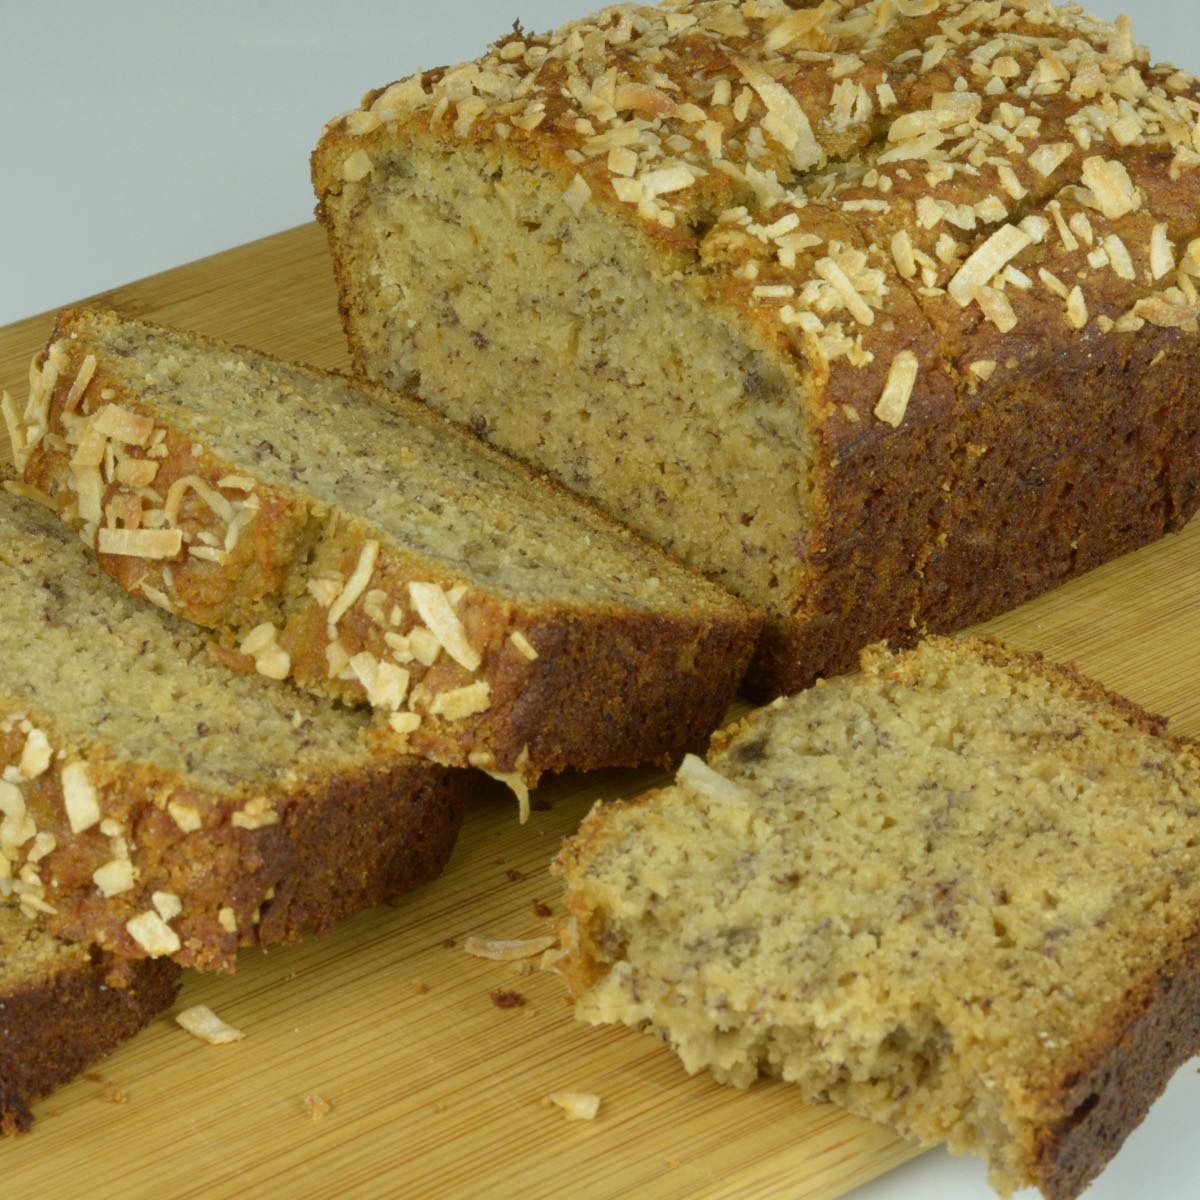 A loaf of coconut banana bread with slices showing the interior.